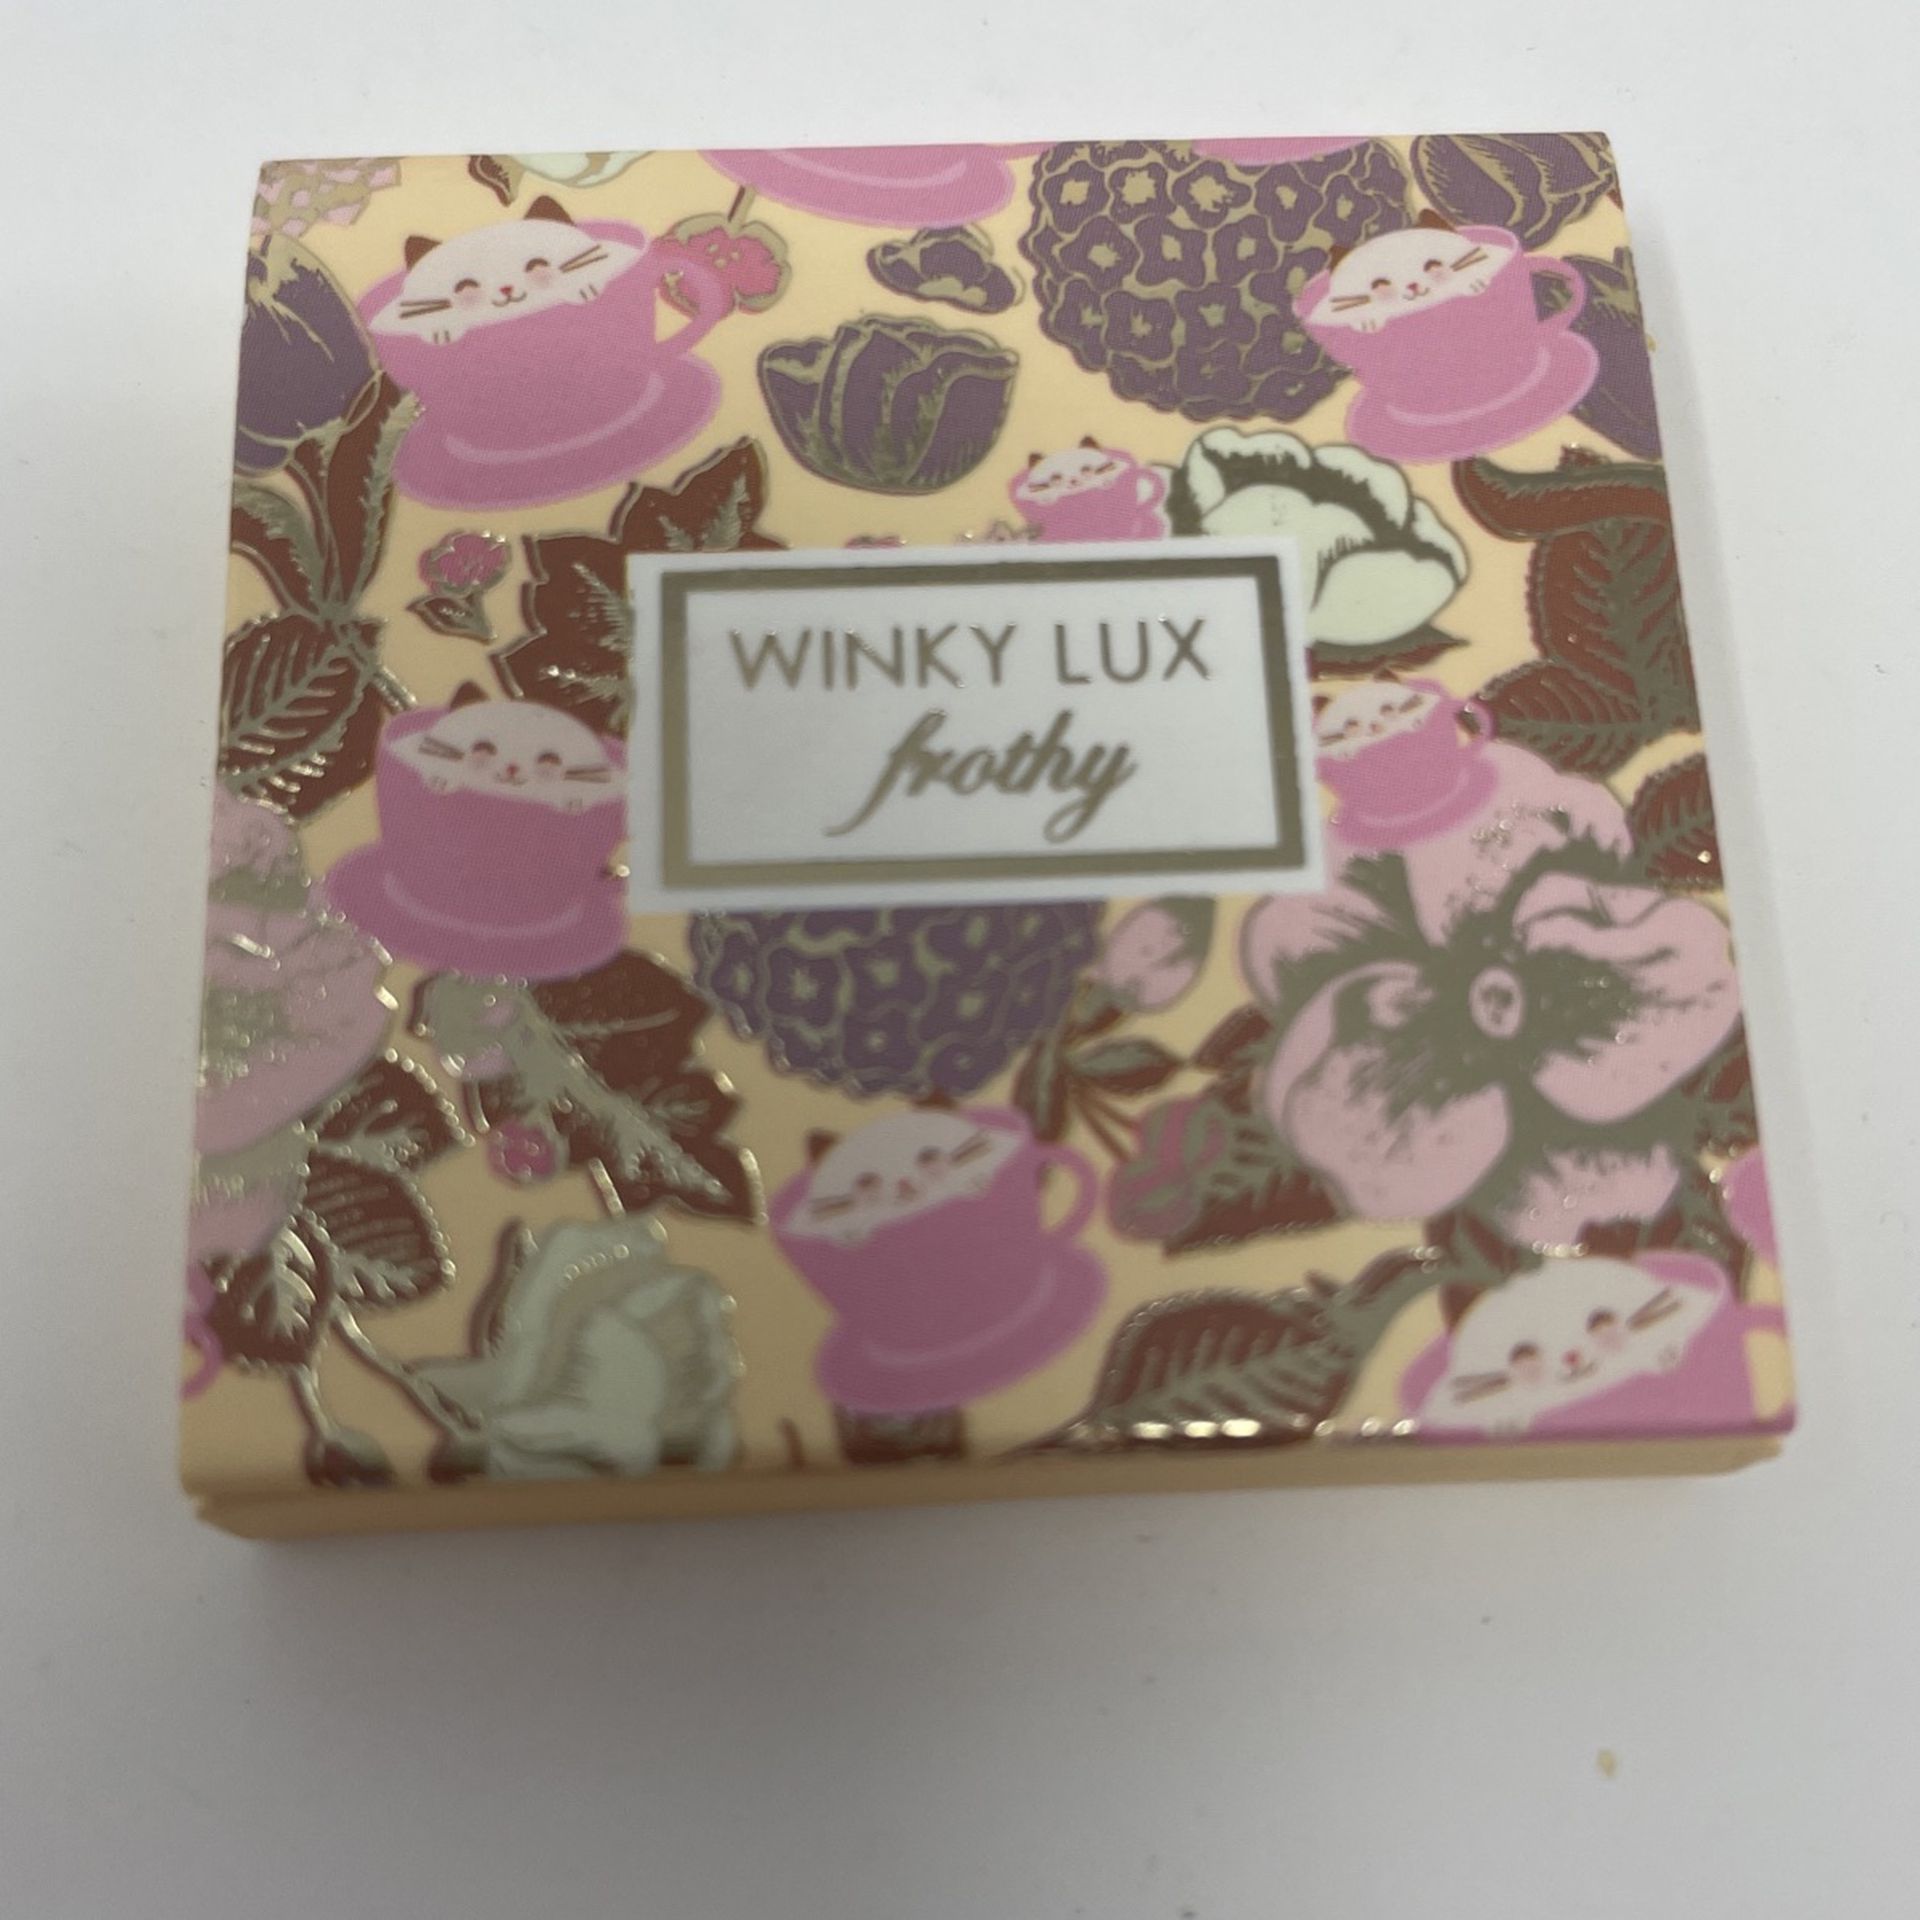 Winky Lux Frothy Eyeshadow/highlighter